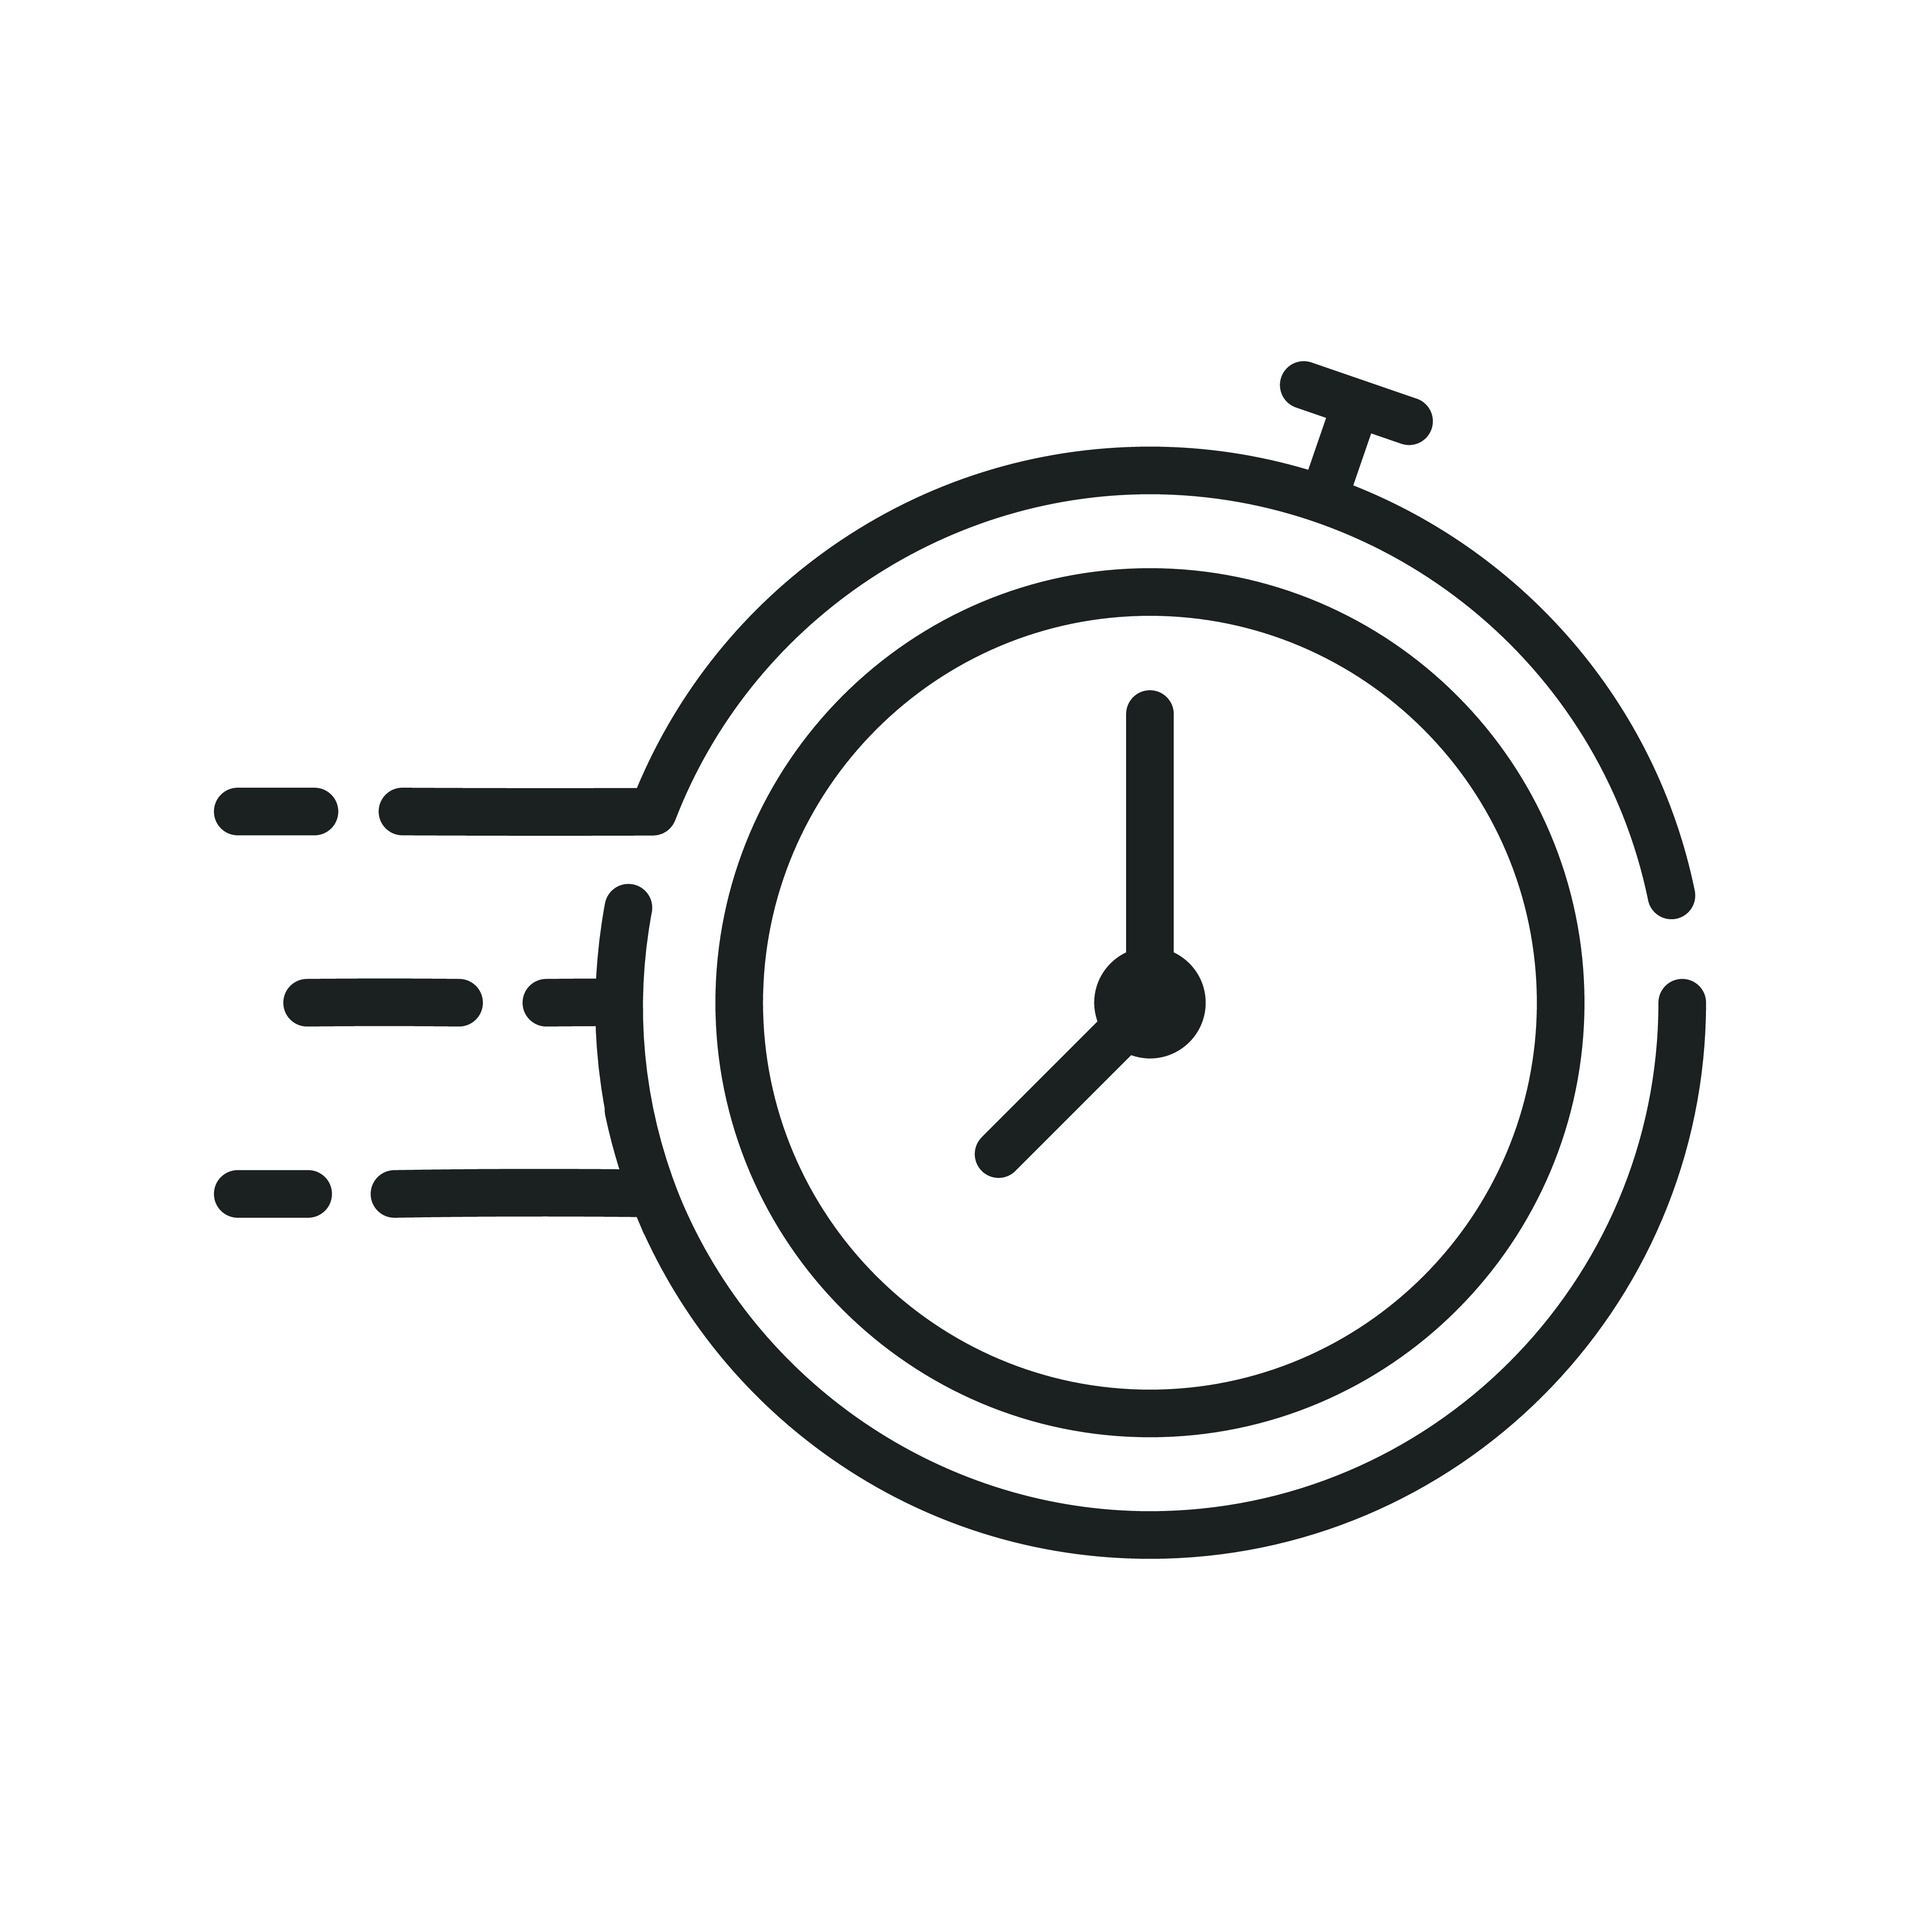 https://static.vecteezy.com/system/resources/previews/027/667/980/original/fast-clock-timer-icon-quick-time-fast-delivery-timer-time-out-sign-countdown-fast-service-sign-clock-speedy-flat-deadline-concept-stopwatch-in-motion-symbol-vector.jpg